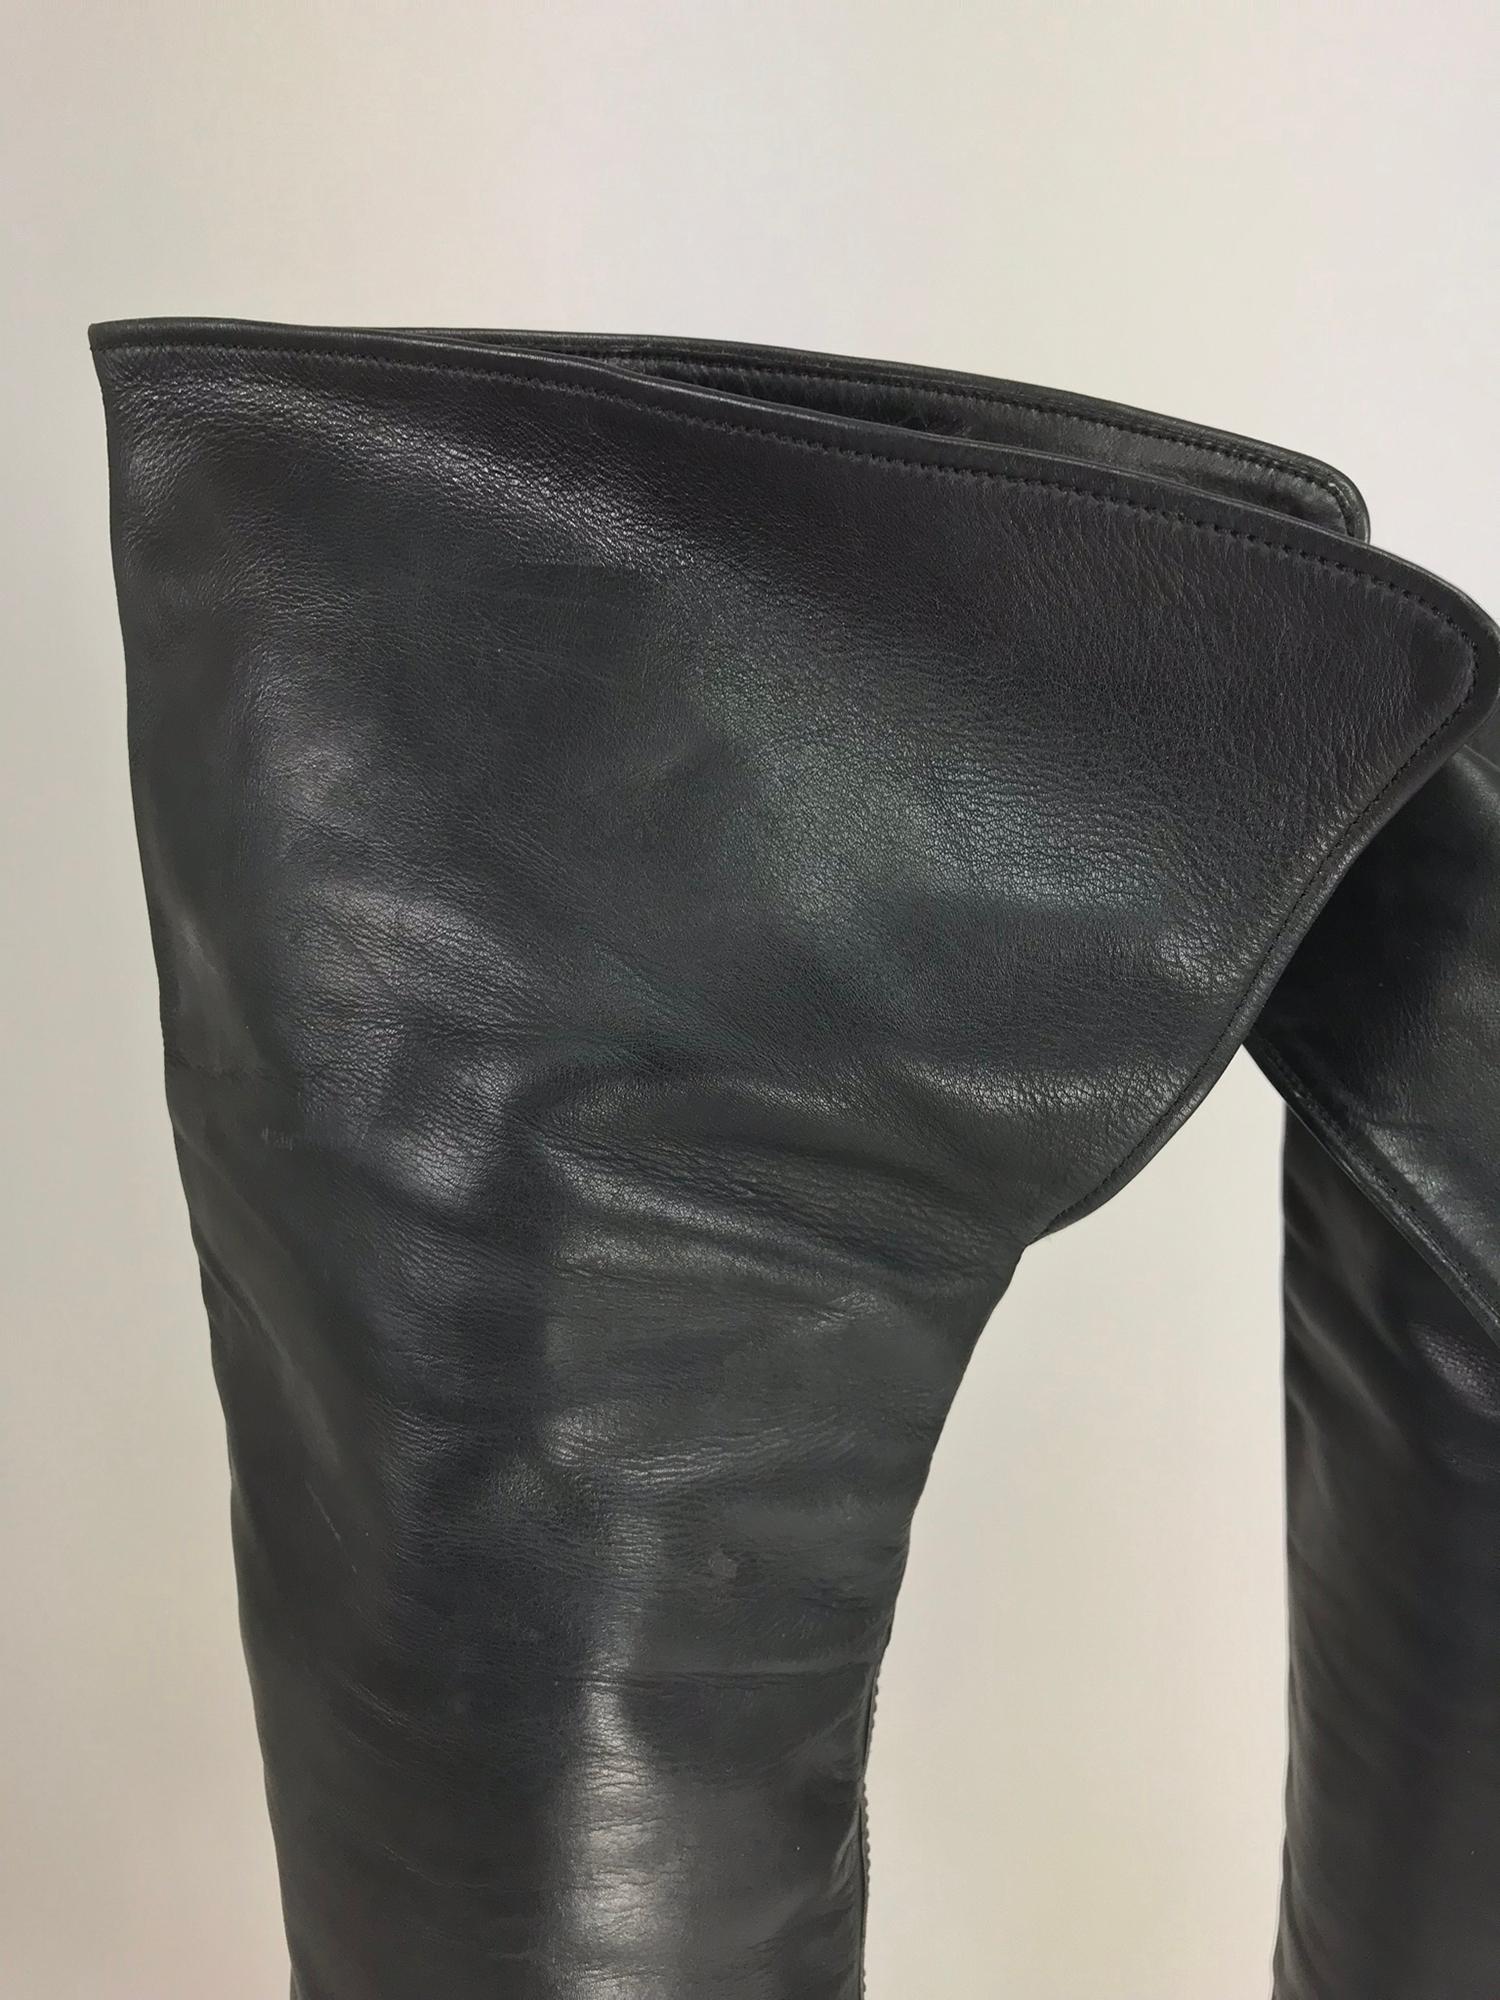 Chanel Over the knee black leather riding boots Claudia Schiffer worn 1990s 3